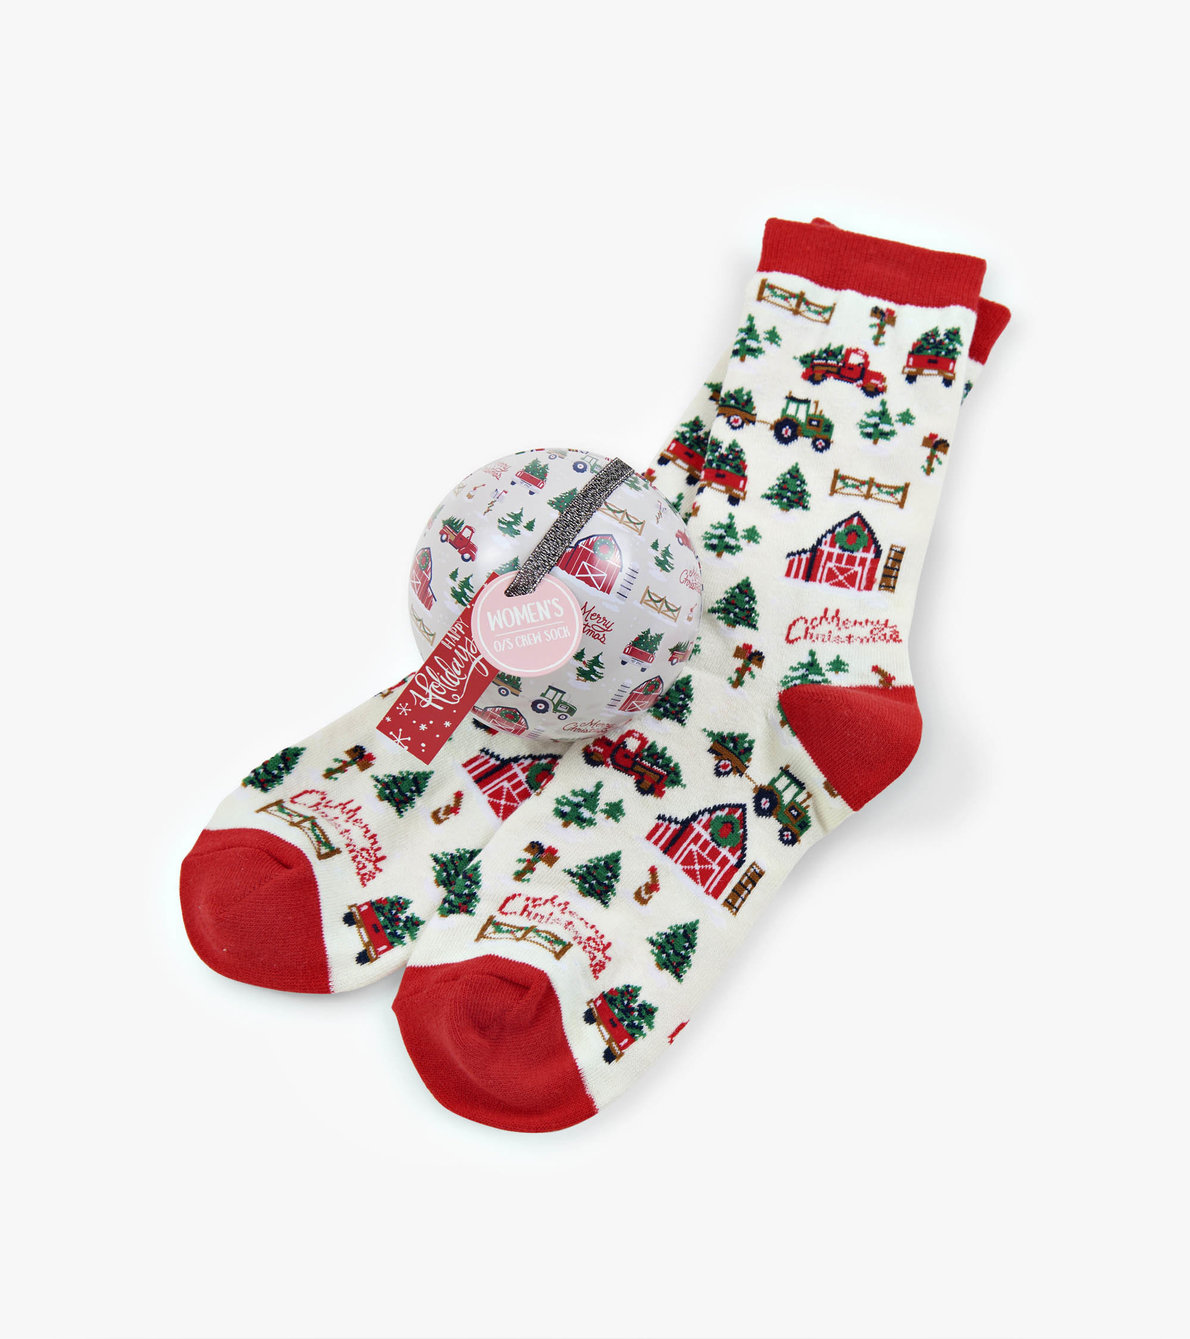 View larger image of Country Christmas Women's Socks in Balls